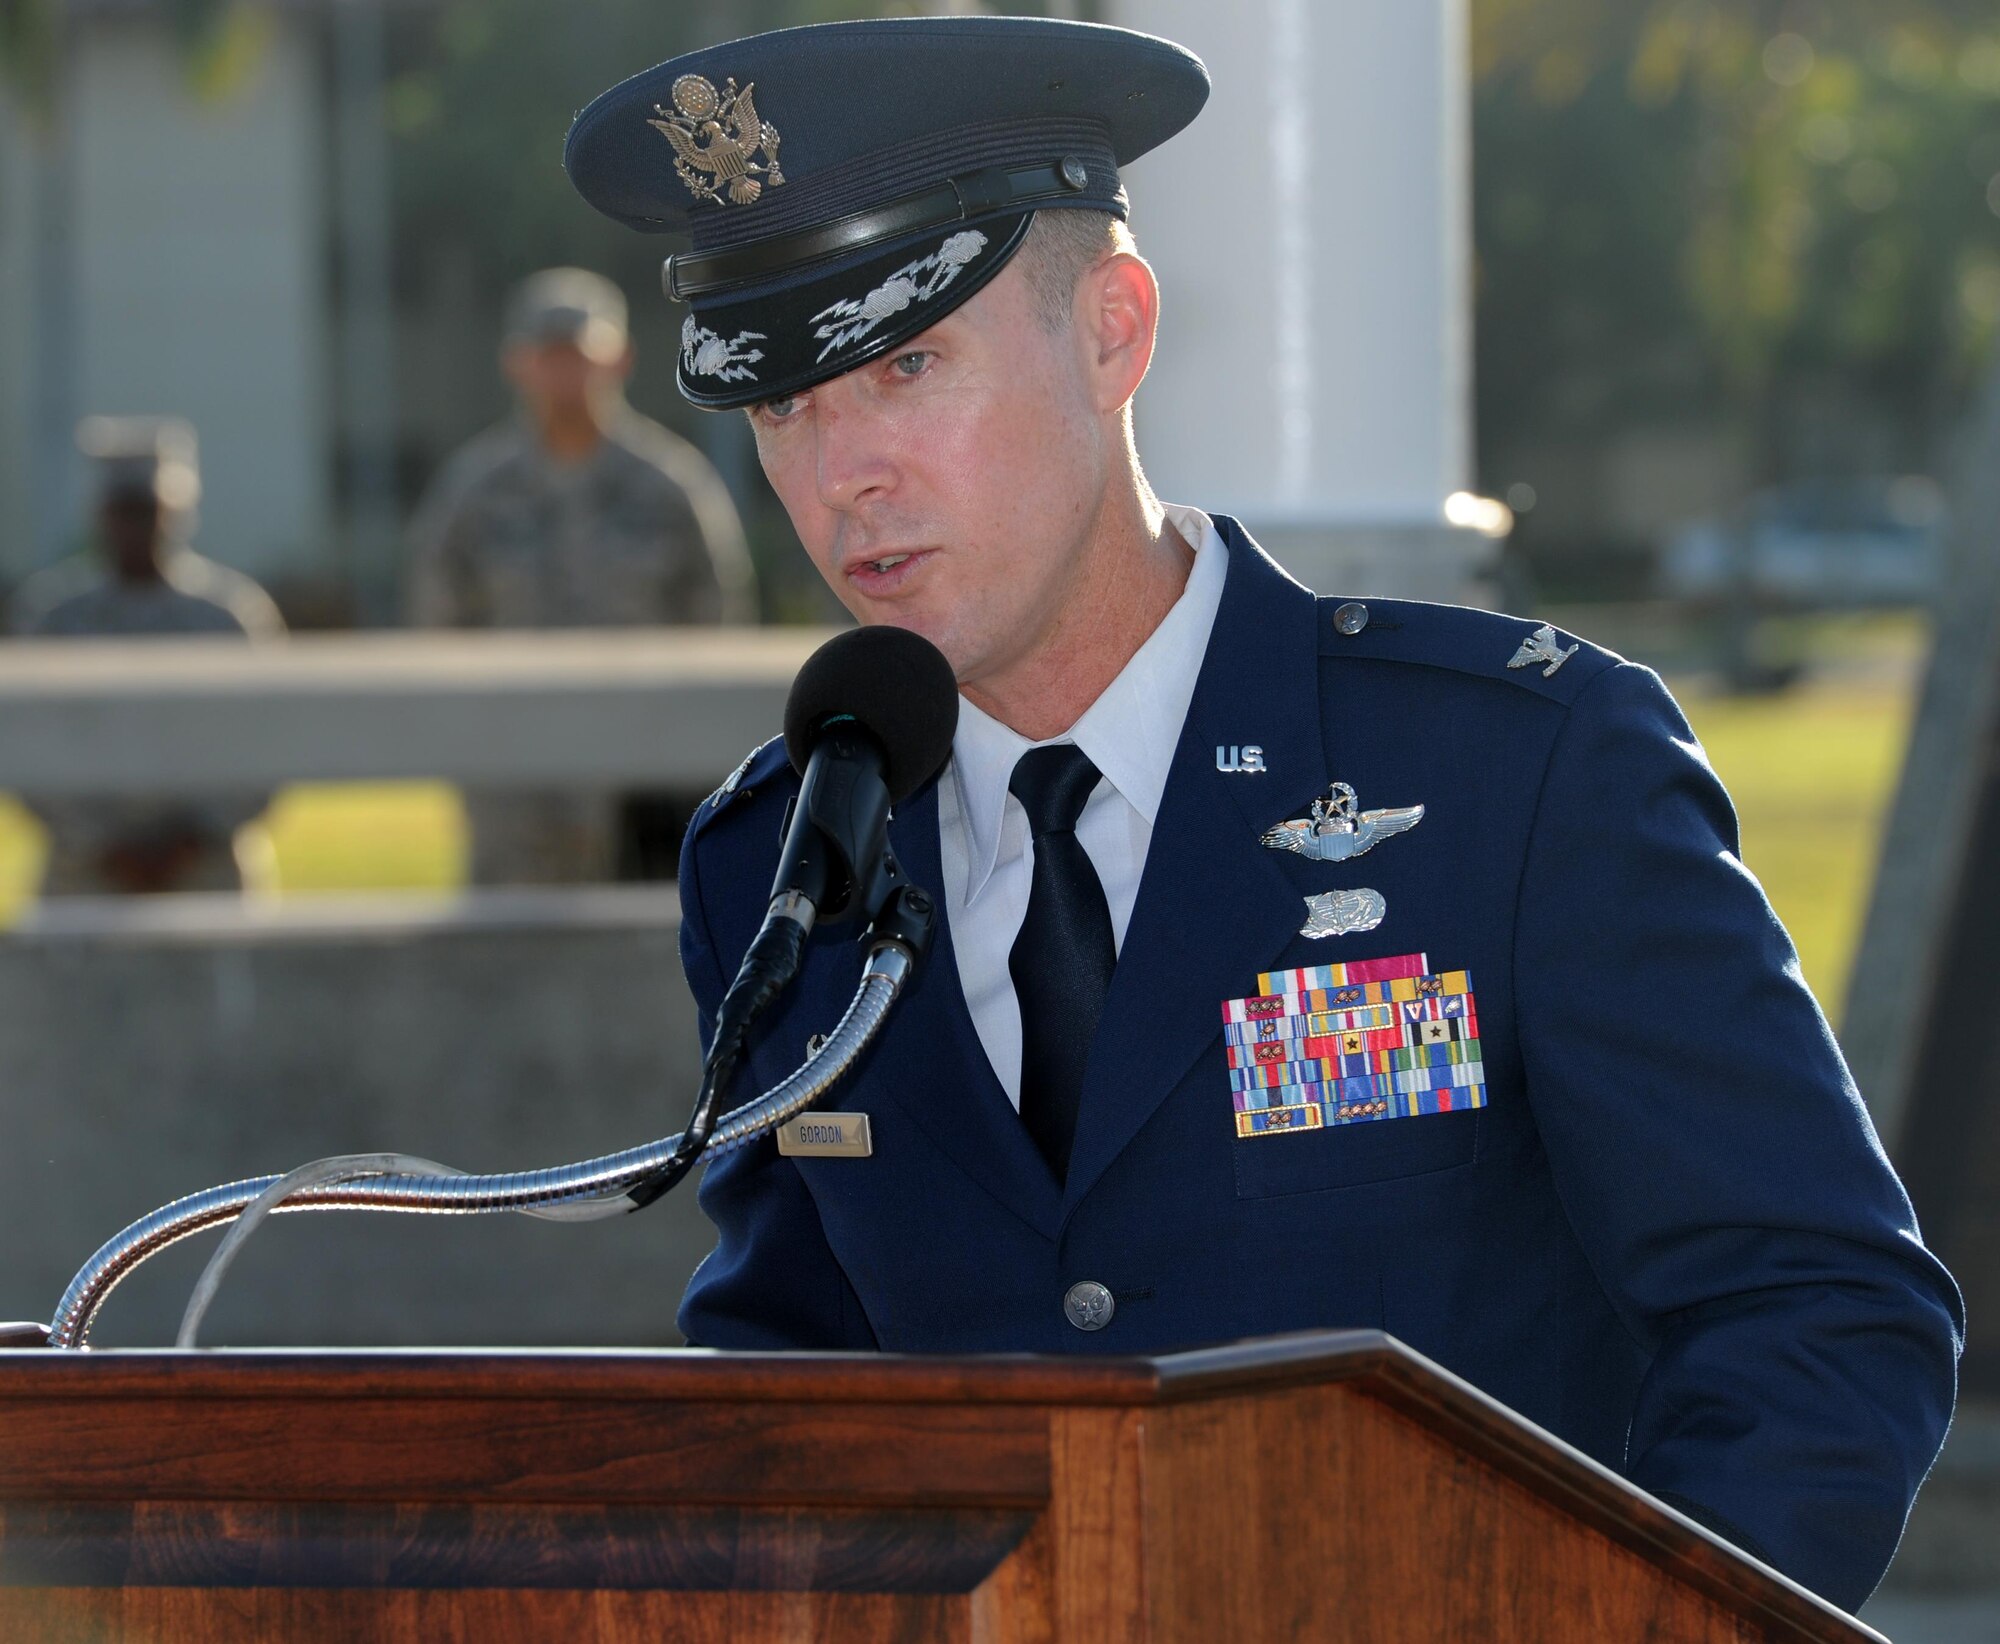 Col. Kevin Gordon, 15th Wing commander, delivers a speech during the 75th Commemoration of the December 7, 1941 attack on Hickam Field ceremony  Dec. 7, 2016, at Joint Base Pearl Harbor-Hickam, Hawaii. The attacks on seven bases throughout Oahu precipitated America's entry into World War II, and the annual commemoration ceremony is designed to foster reflection, remembrance, and understanding for those affected by the events that took place 75 years ago. (U.S. Air Force photo by Tech. Sgt. Nathan Allen)